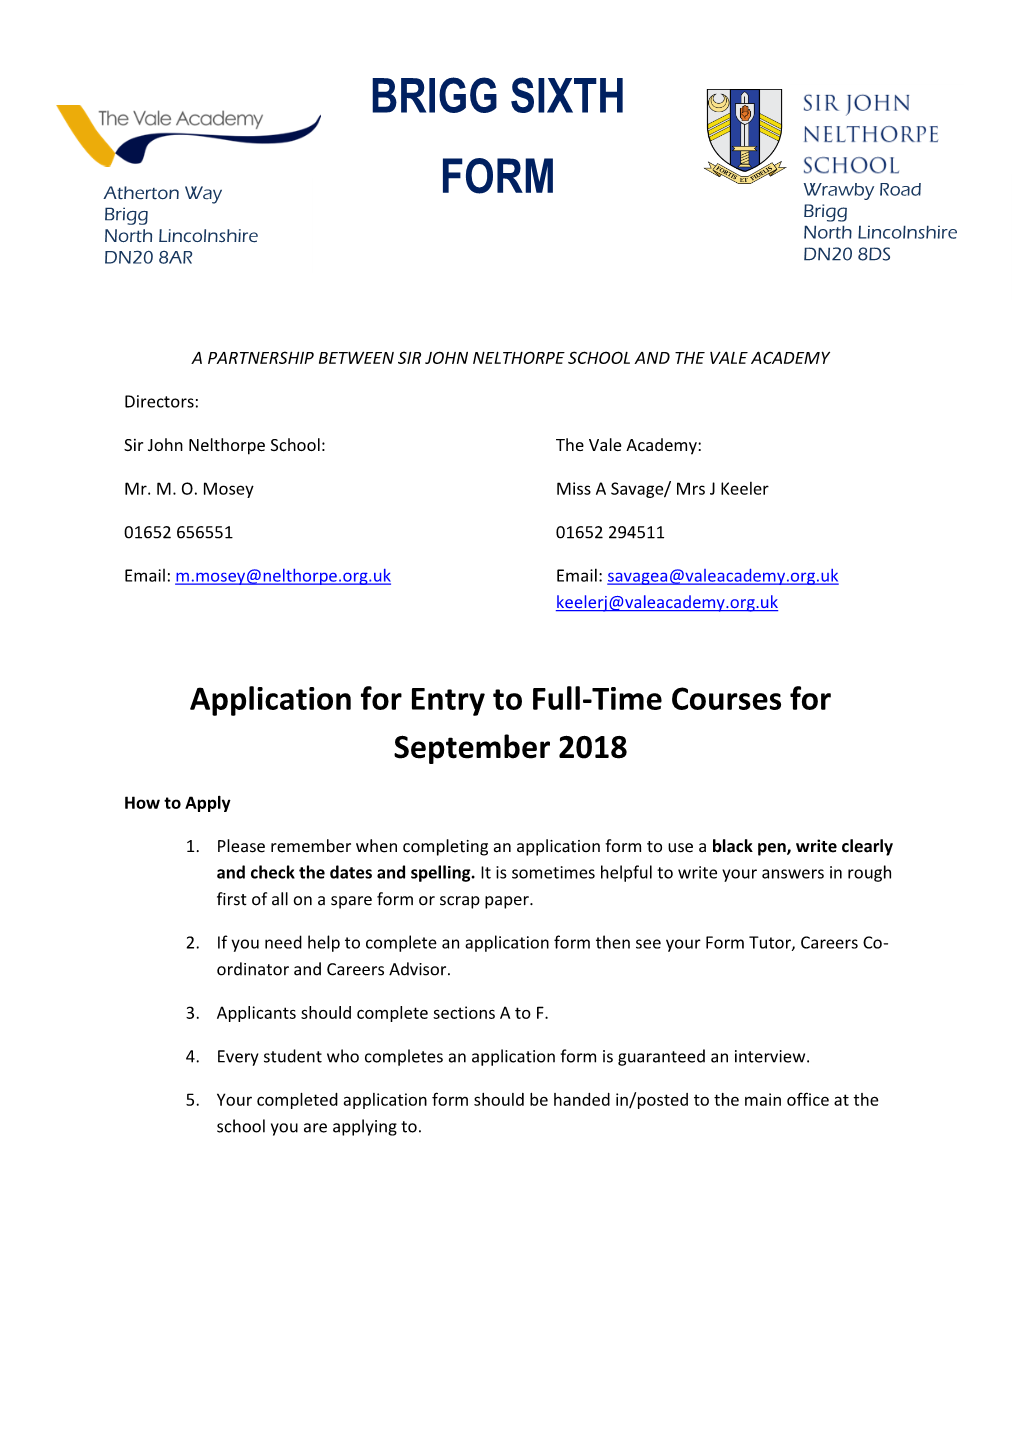 Application for Entry to Full-Time Courses for September 2018